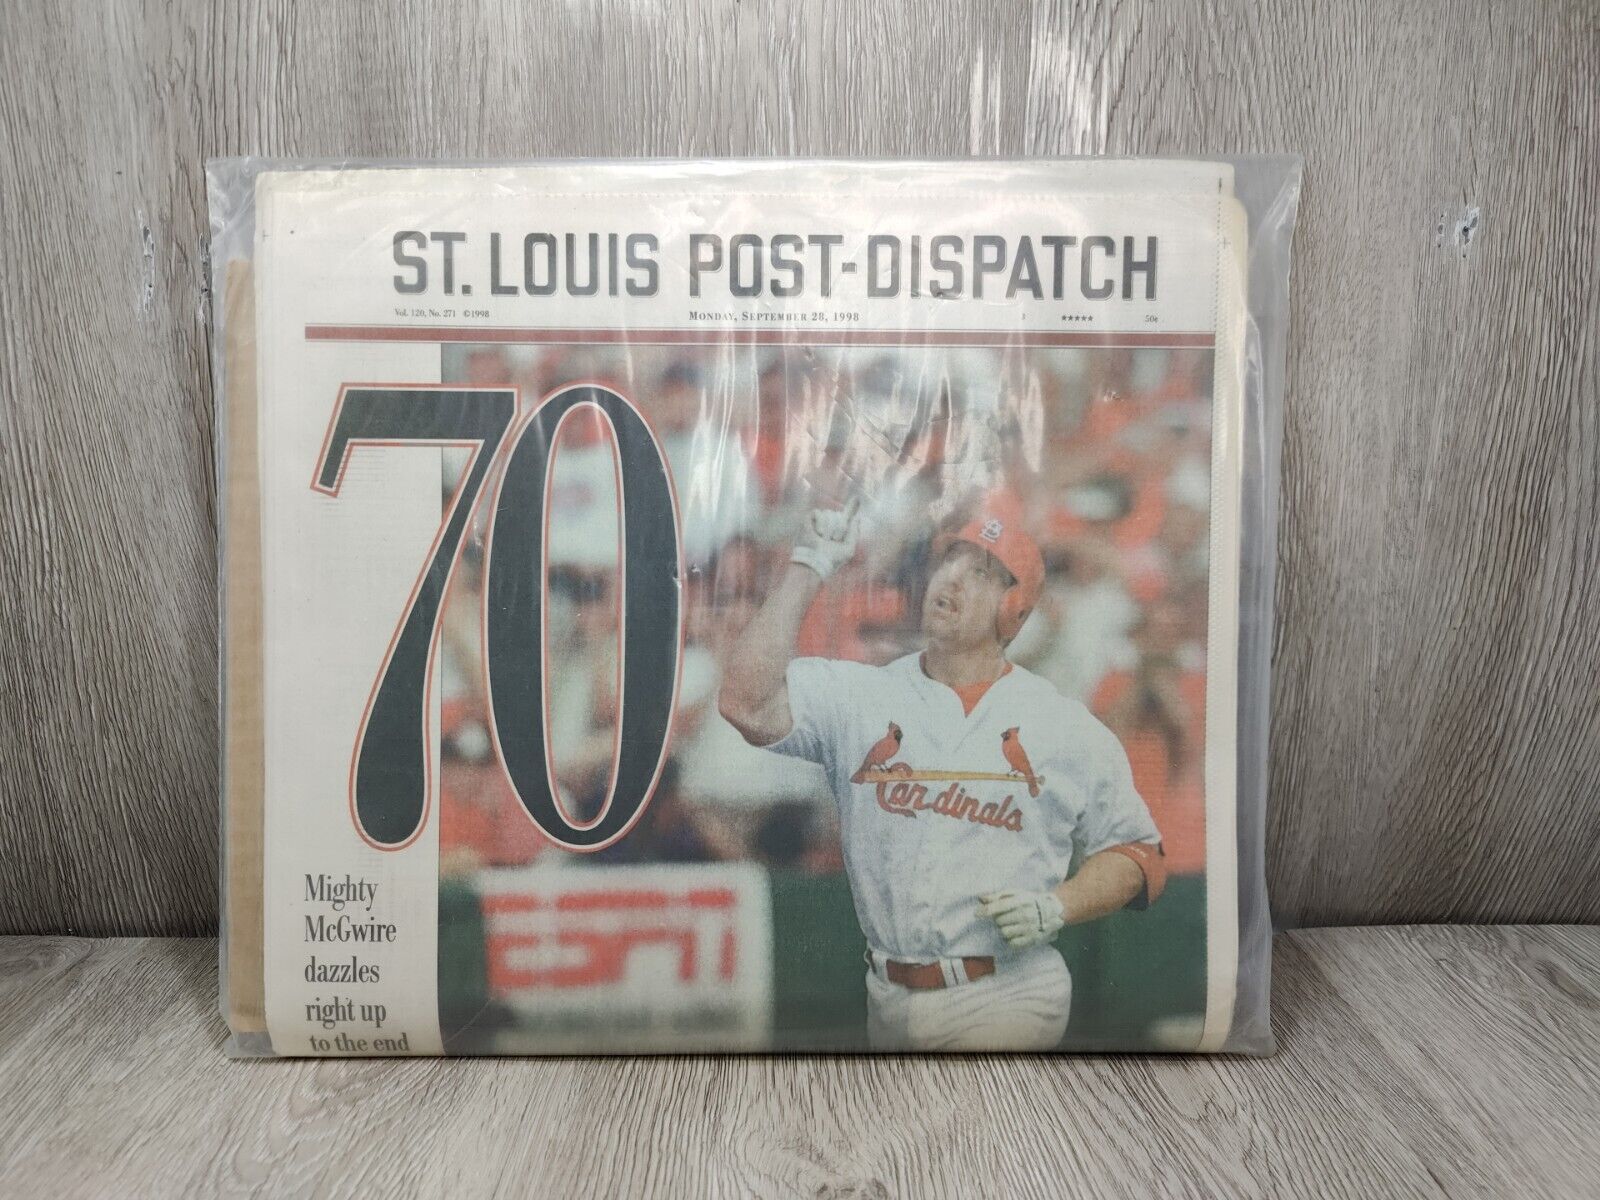 ST LOUIS Post-Dispatch September  28 1998 NEWSPAPER - MARK MCGWIRE HITS HR 70. 